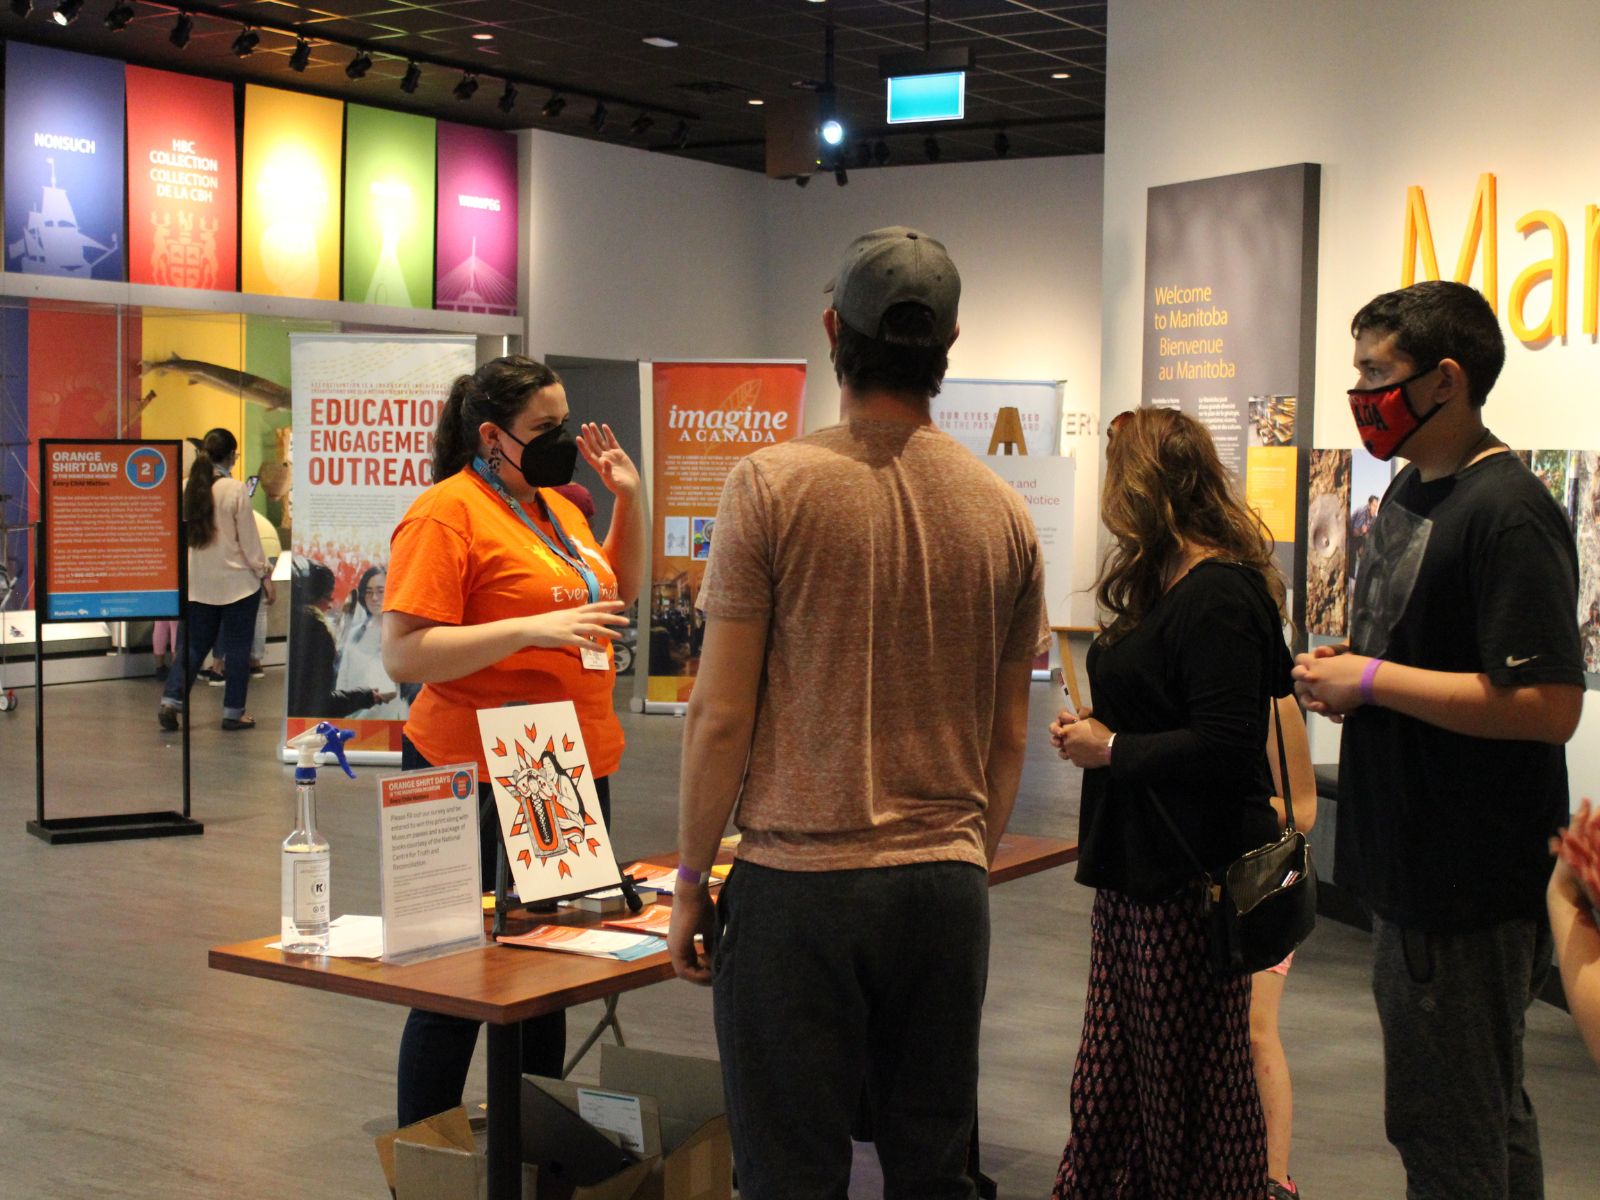 A Museum staff person wearing an orange t-shirt standing behind a table in the Welcome Gallery speaking with three Museum visitors. In the background, further inside the gallery is signage and banners for Orange Shirt Days.